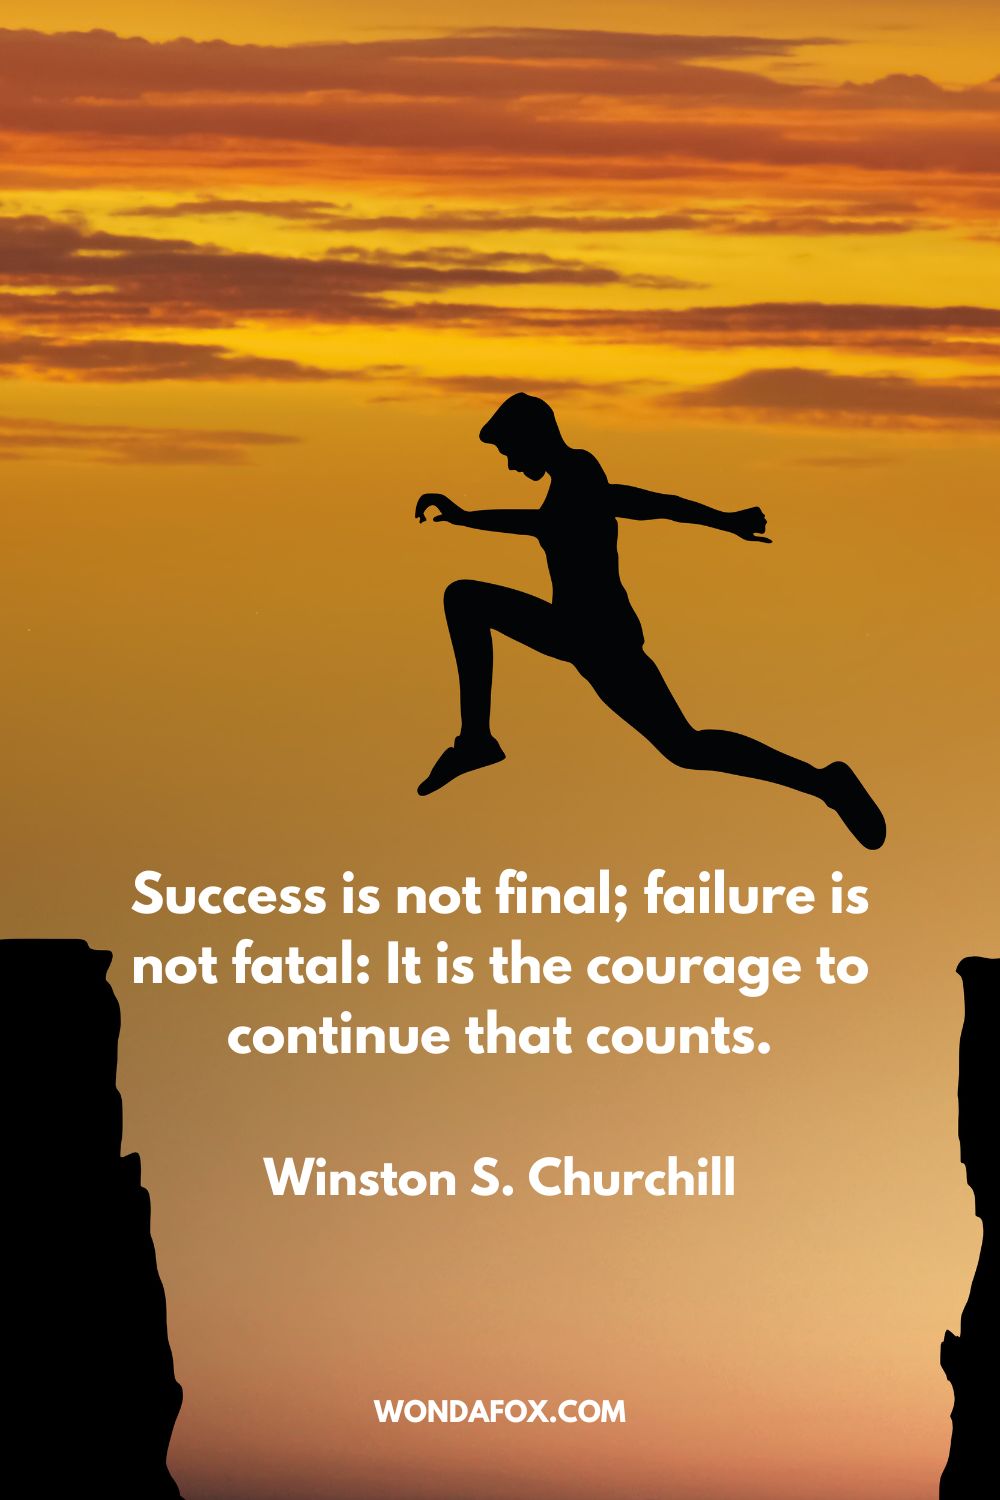 Success is not final; failure is not fatal: It is the courage to continue that counts. Winston S. Churchill